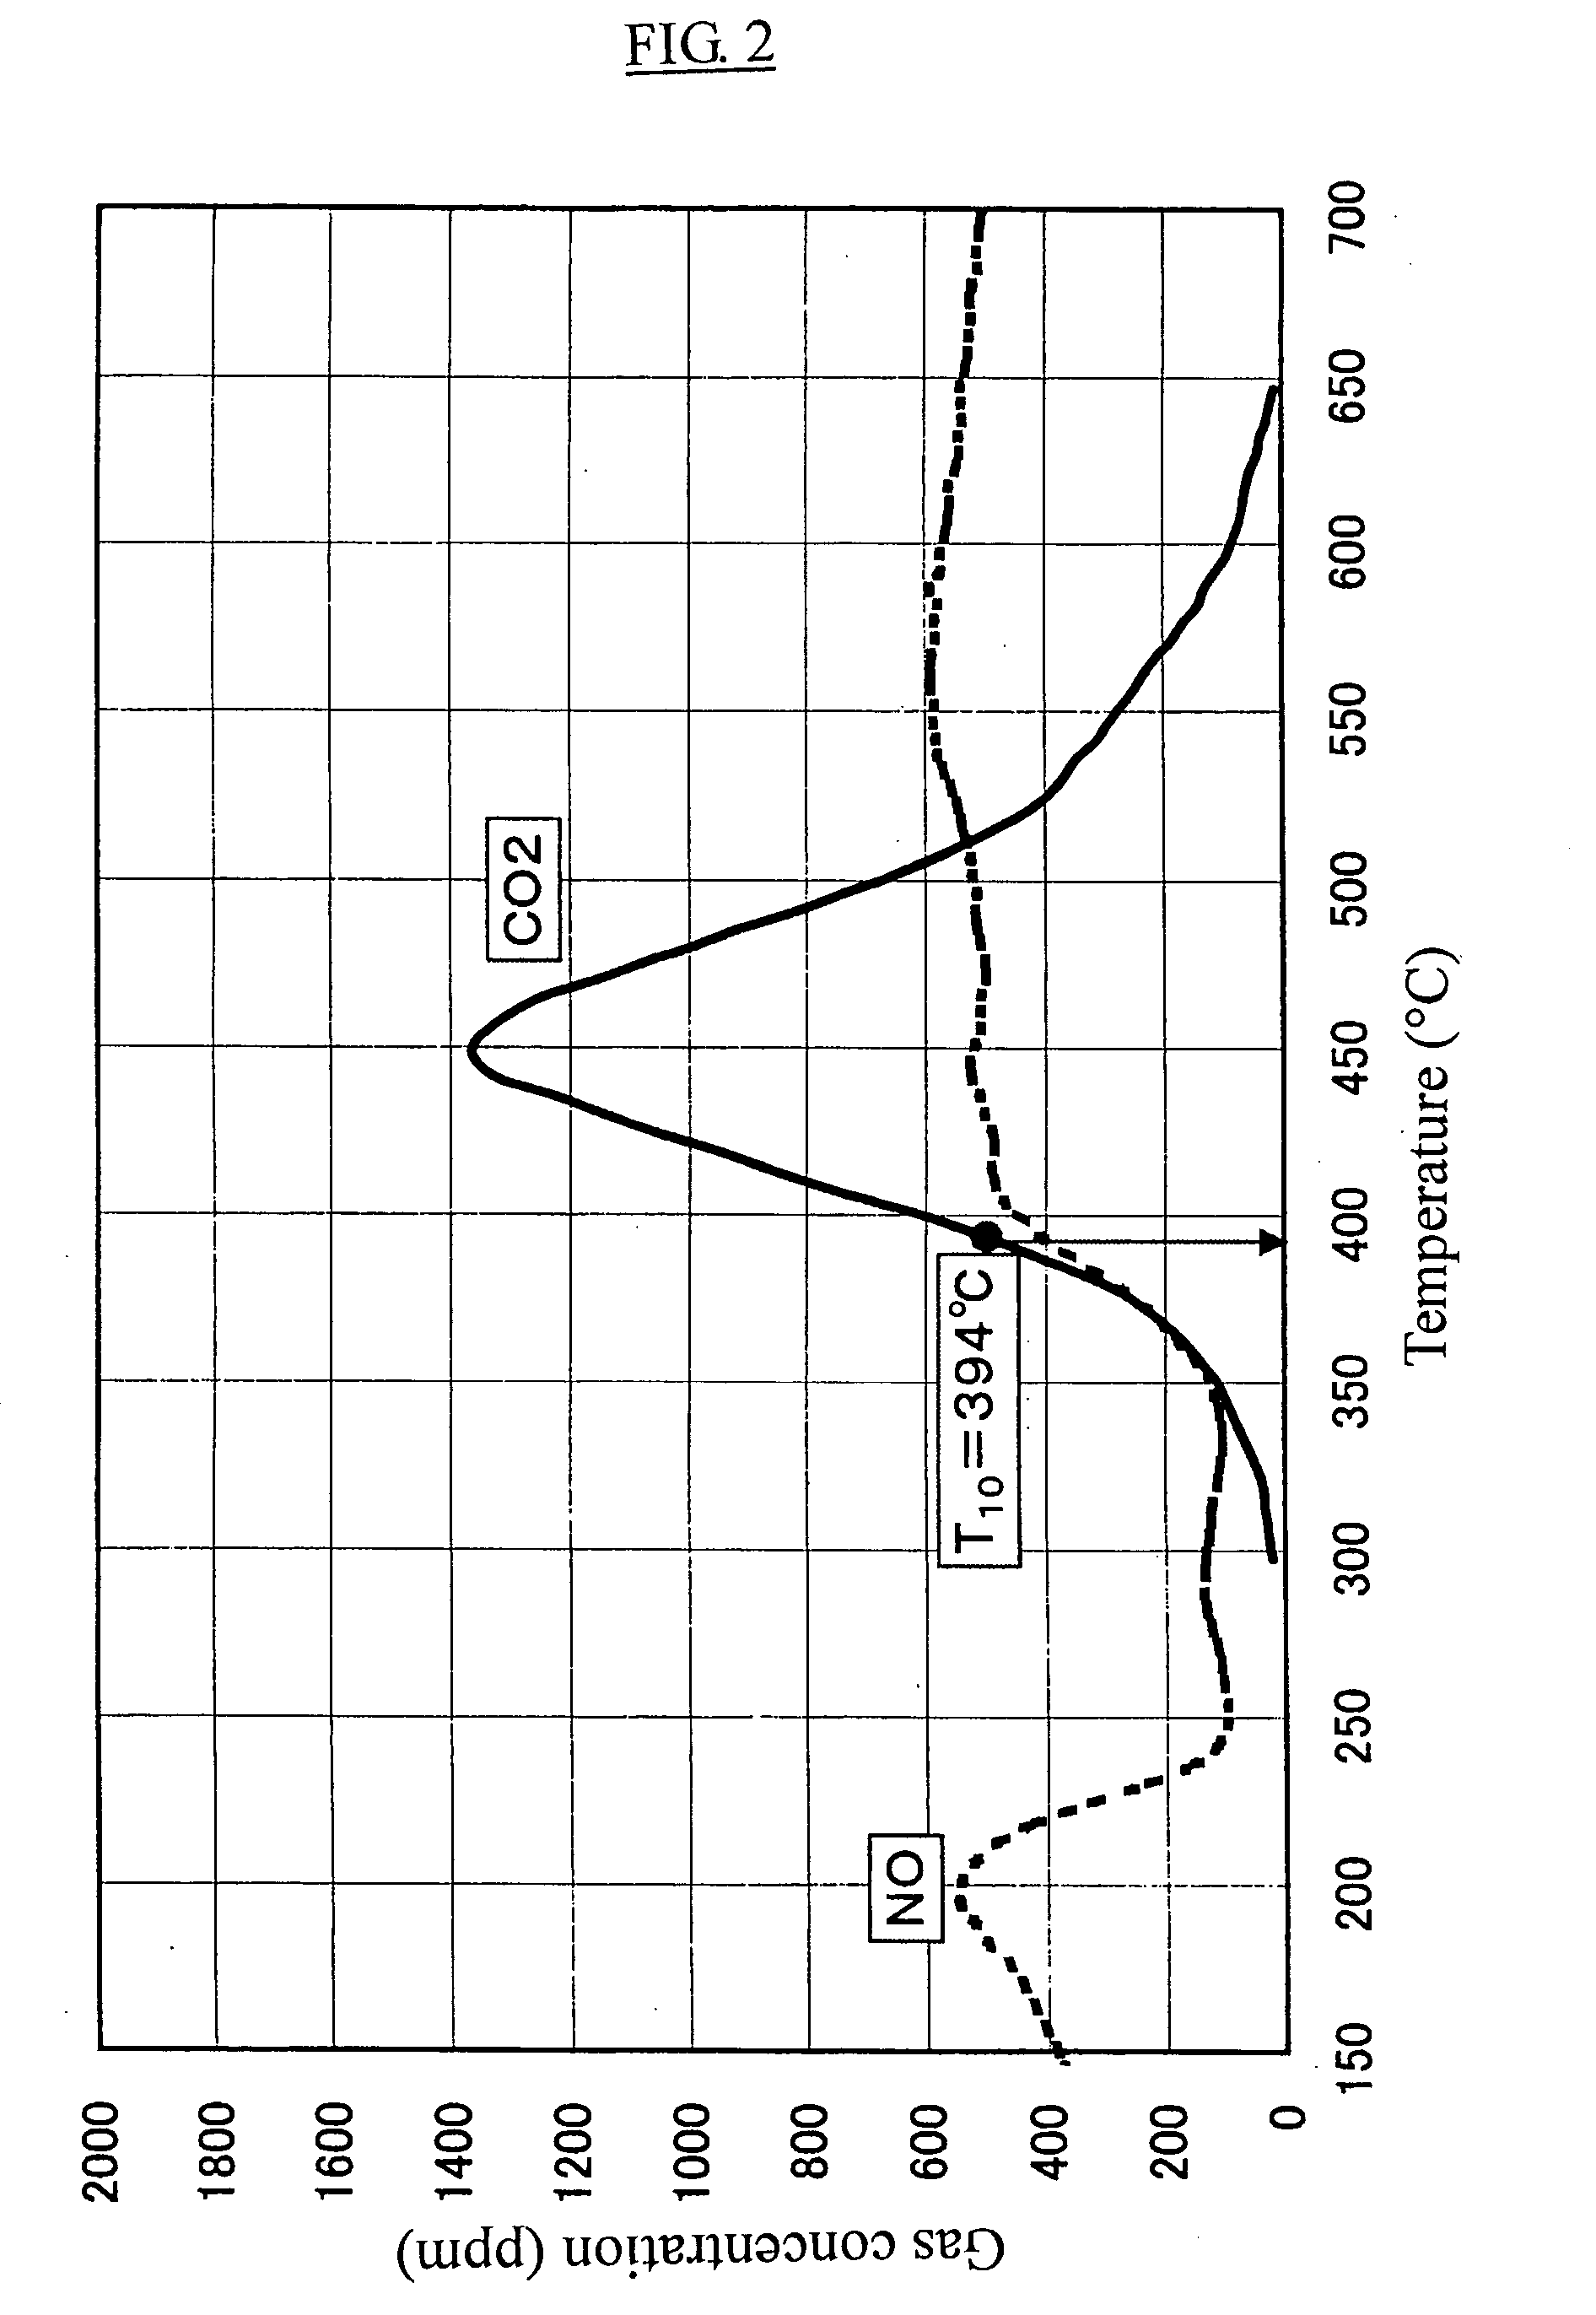 Particulate matter oxidation catalyst and filter